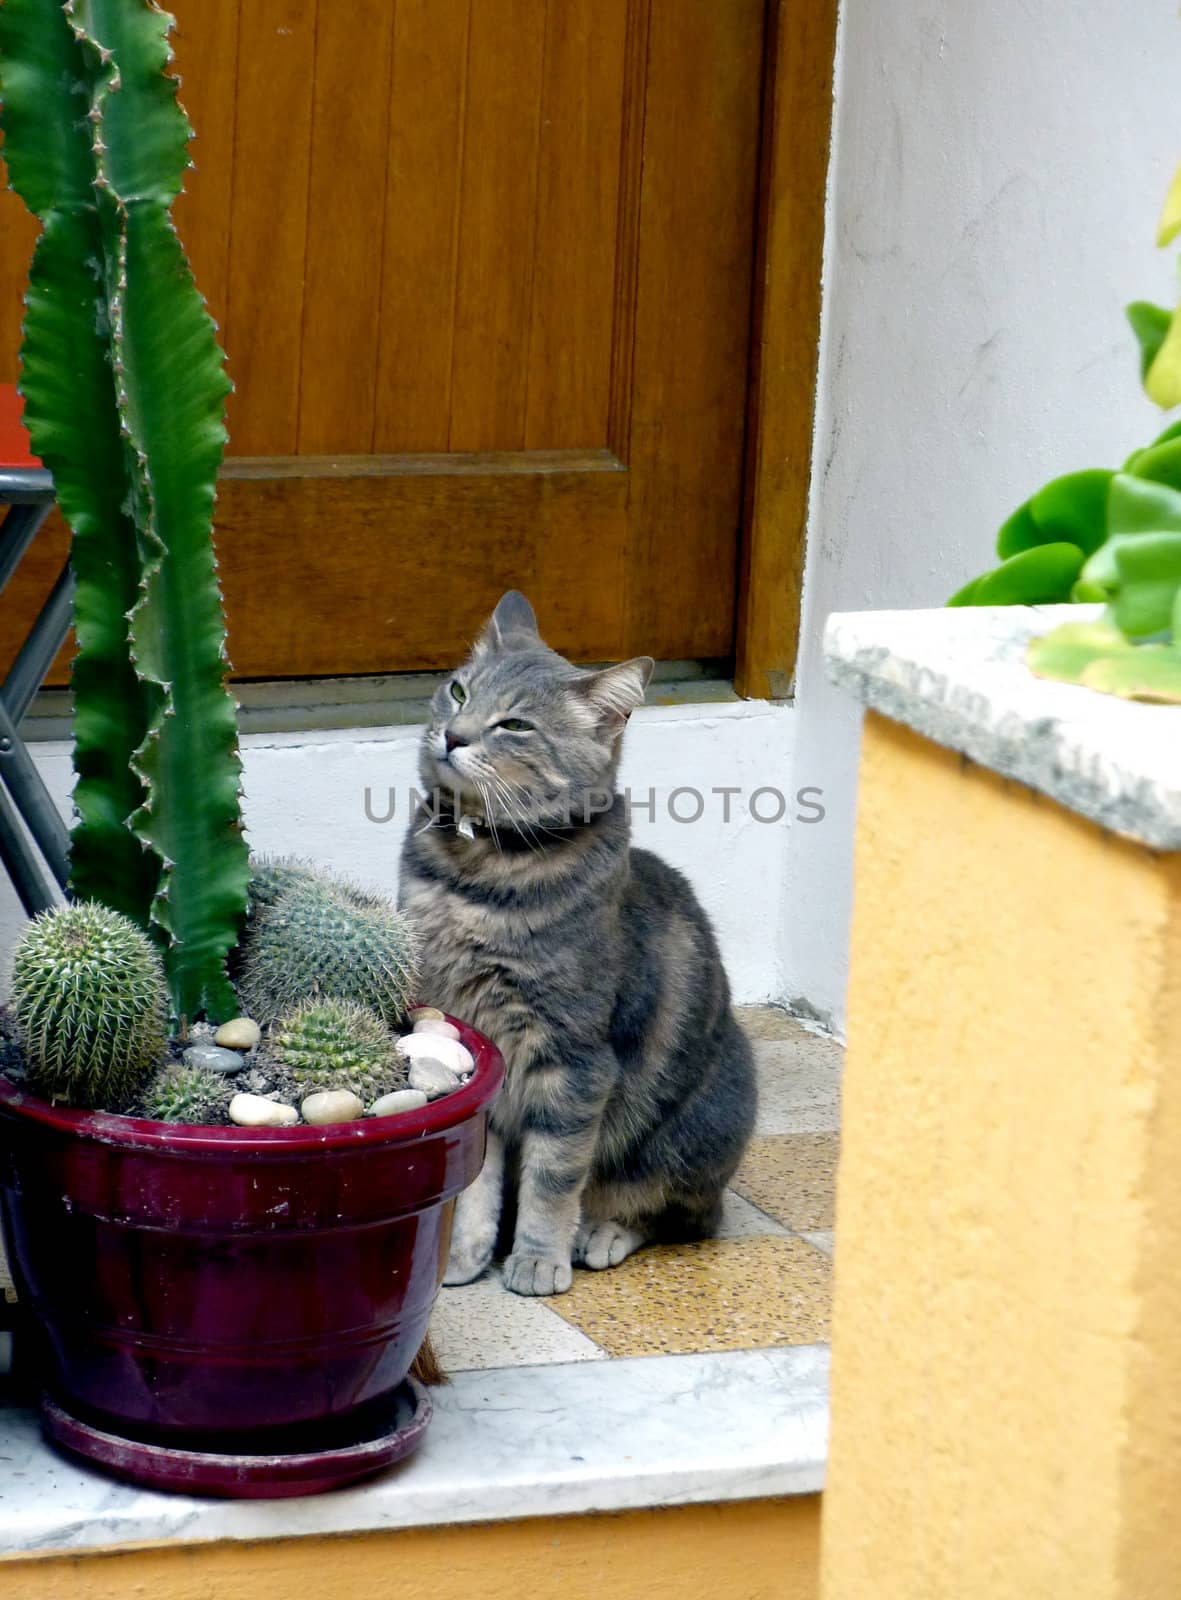 Cute grey cat standing in front of a door and behind a cactus